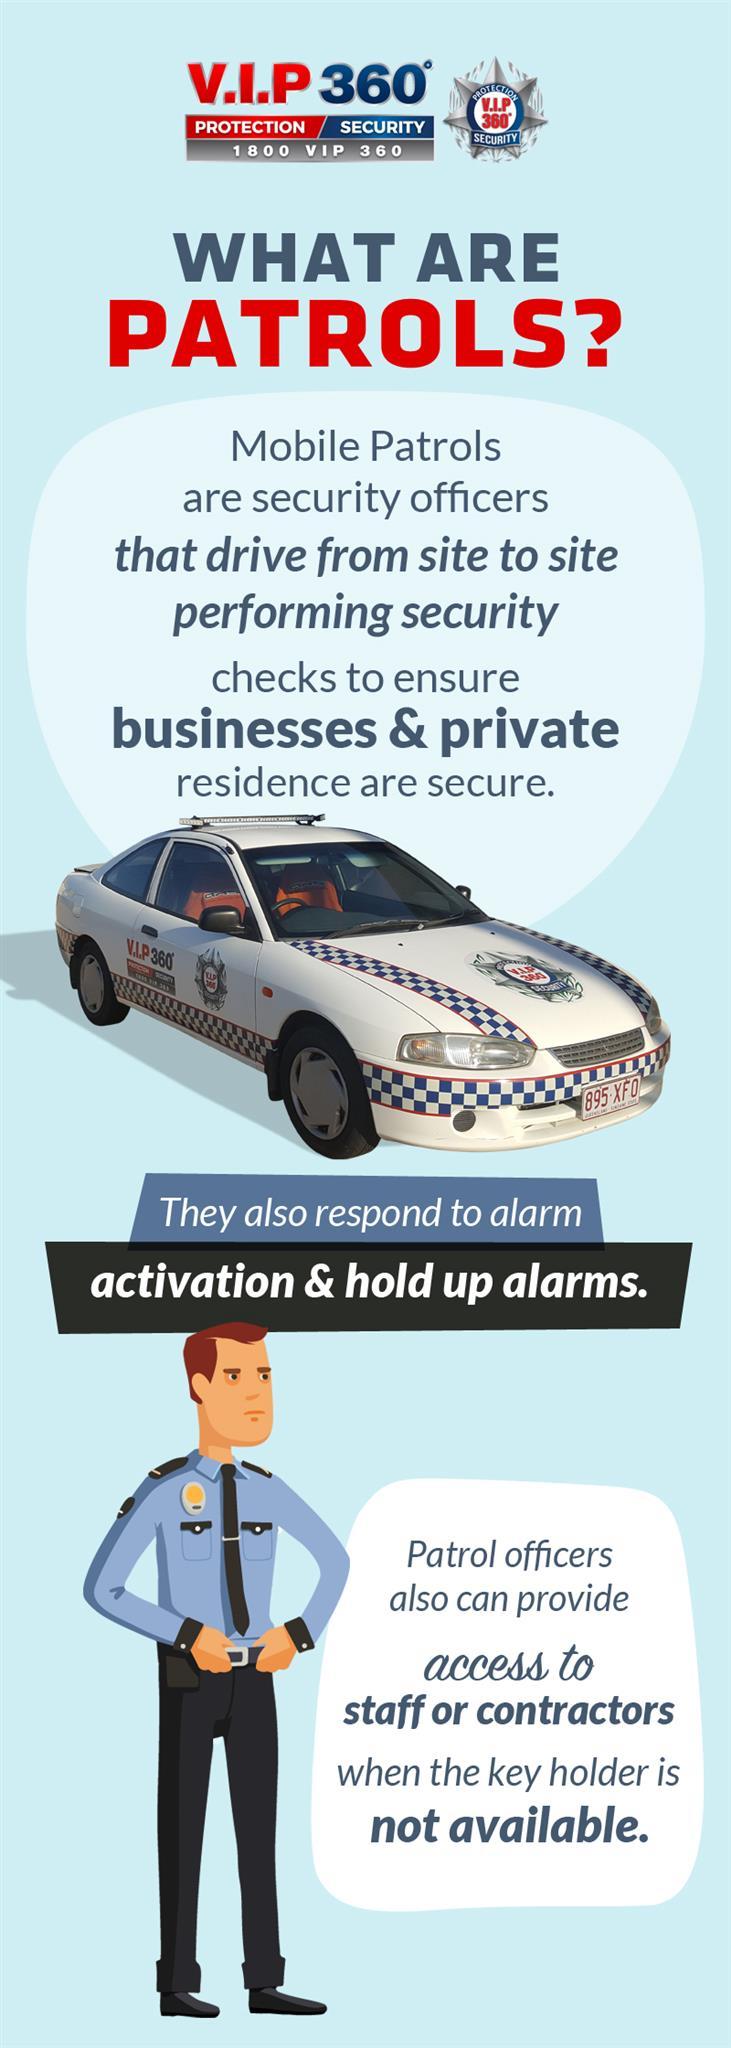 Contact VIP 360 for Security Patrol Services in Cairns